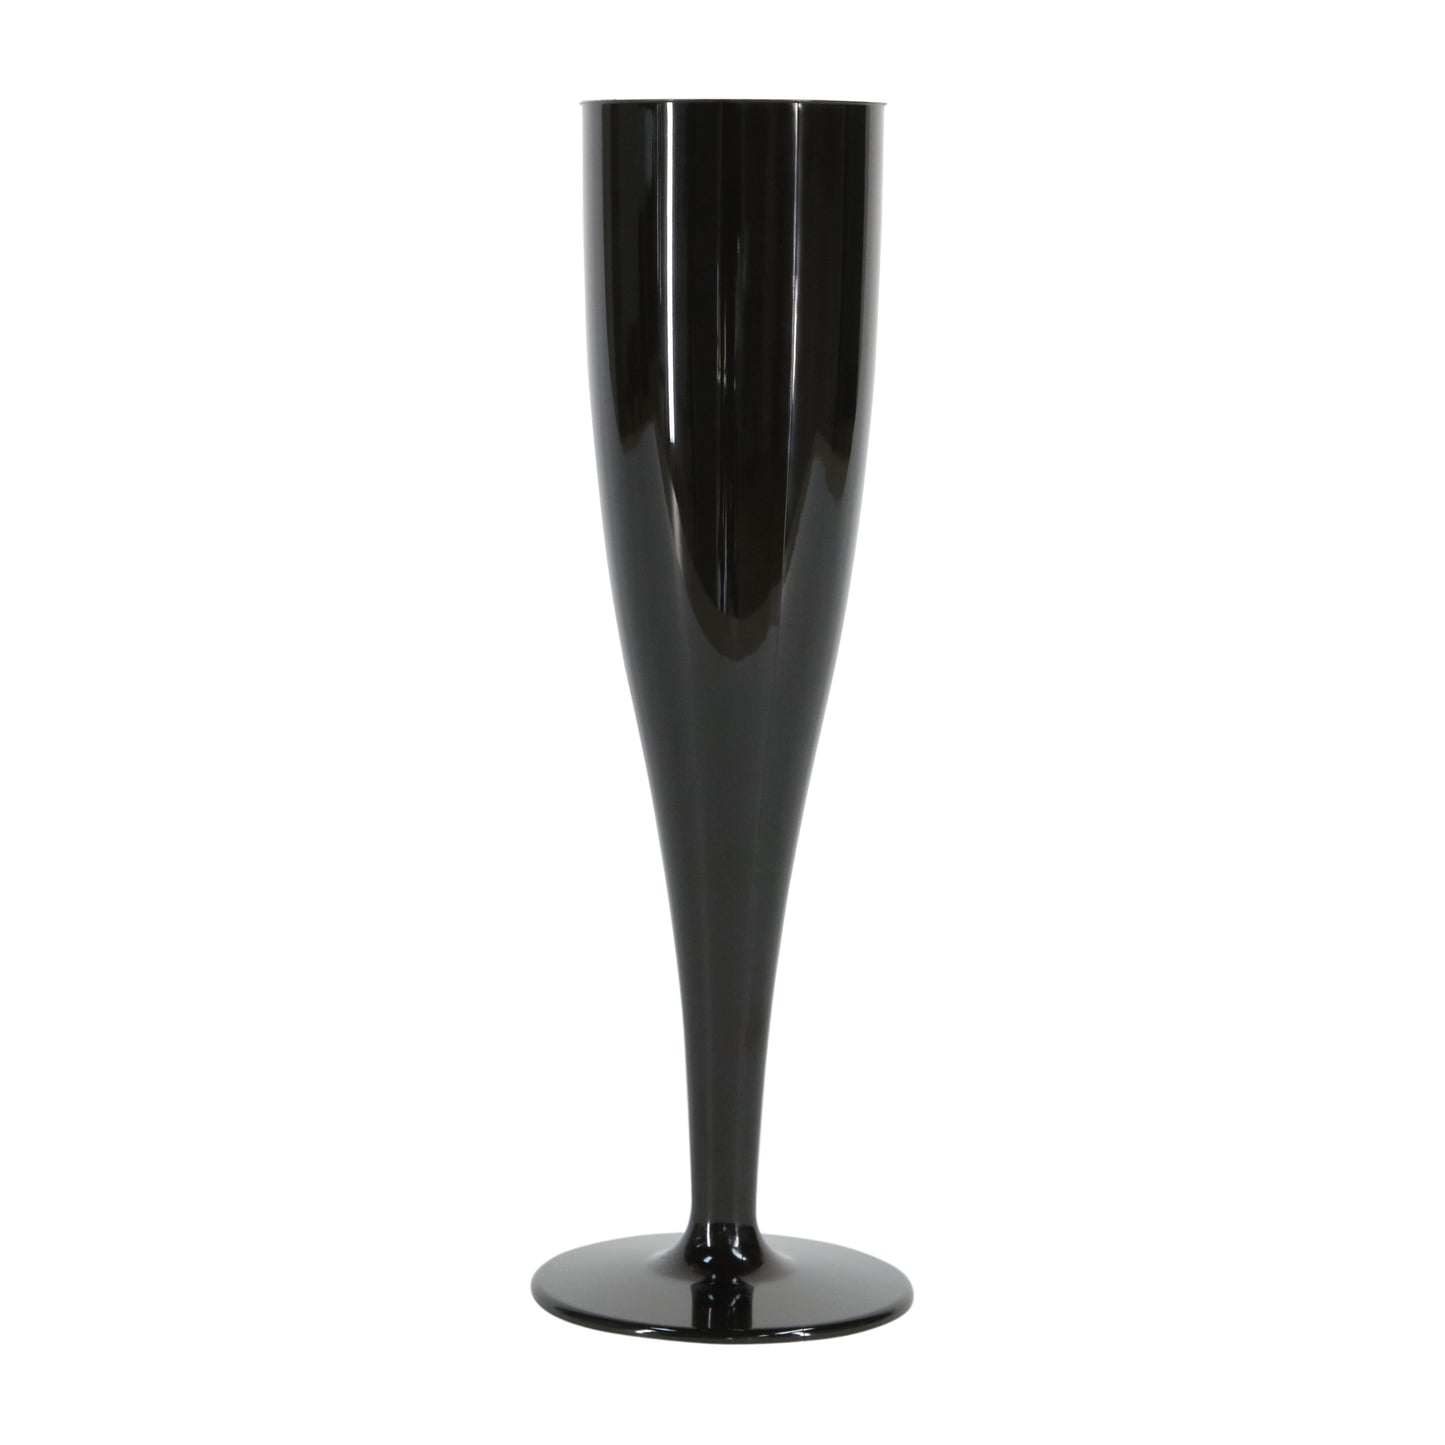 20 x Black Prosecco Flutes – Made from Biodegradable Material in glossy Bold Black Colour 1-Piece Champagne Glass (Pack of 20 Glasses) for use Indoors and Outdoors, Halloween, Parties, BBQ, Hen Do-5056020187967-EY-PP-214-Product Pro-Black Flutes, Champagne Flute, Champagne Glasses, Flutes, Prosecco Flute, Prosecco Glasses